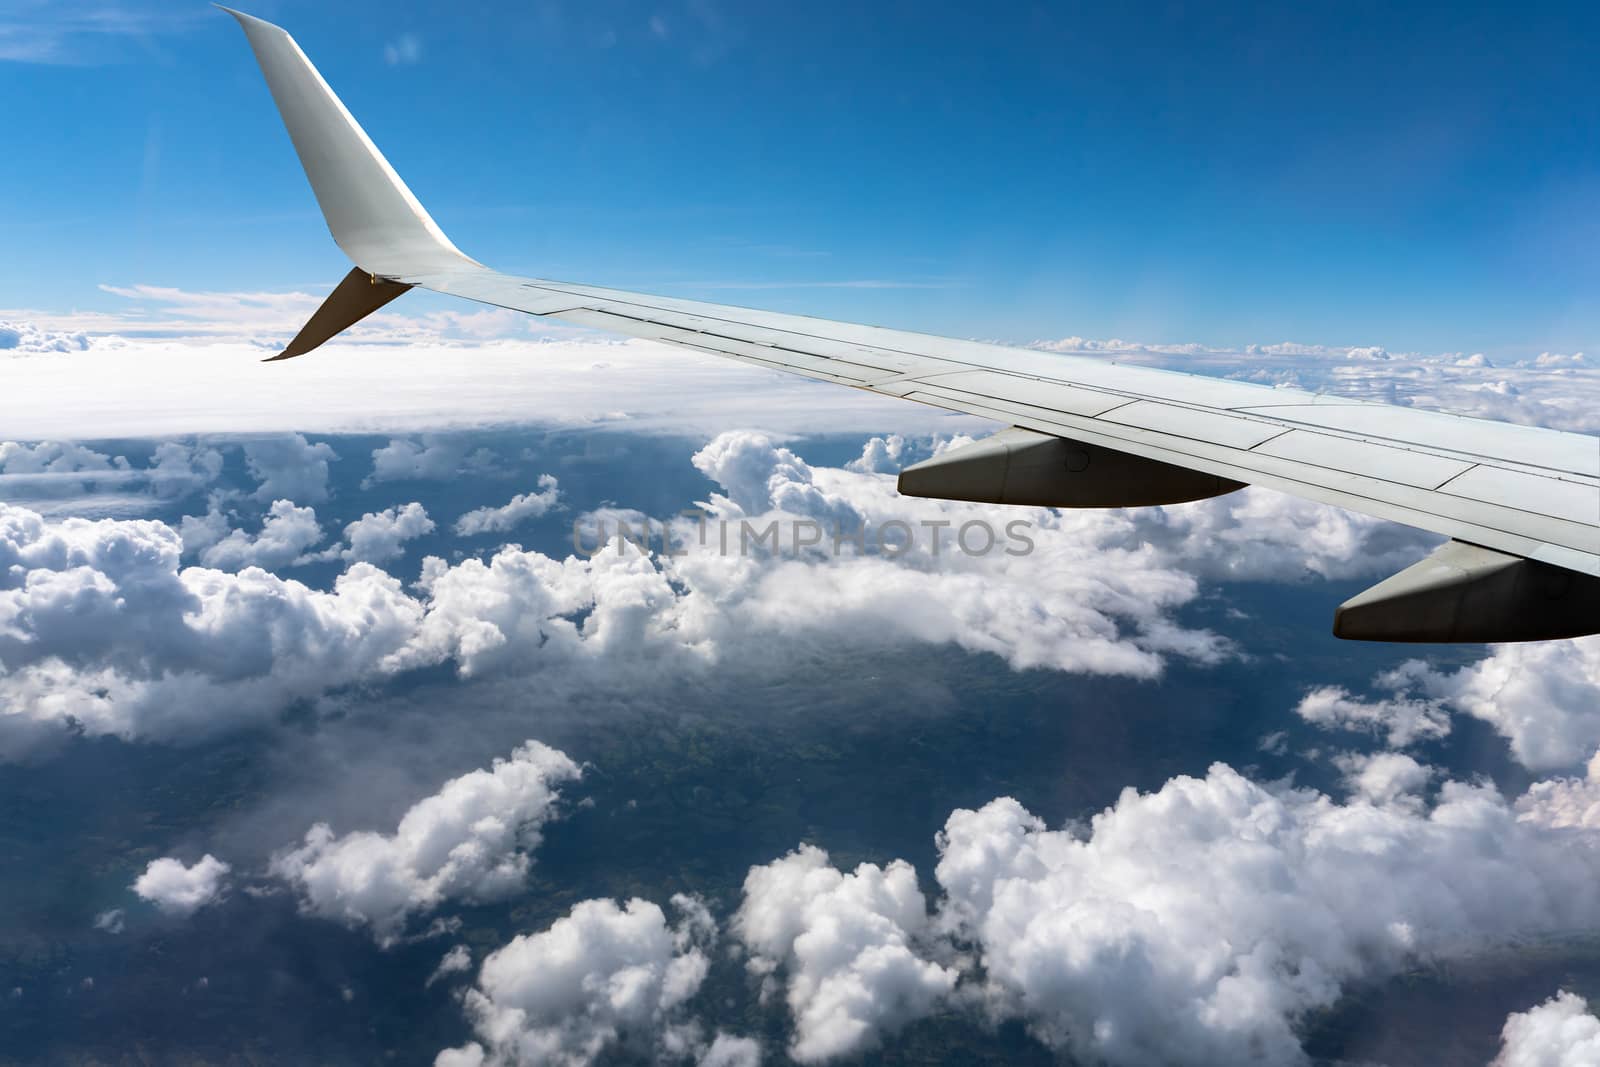 White clouds float under the wing of a sunlit airplane flying under a blue sky

